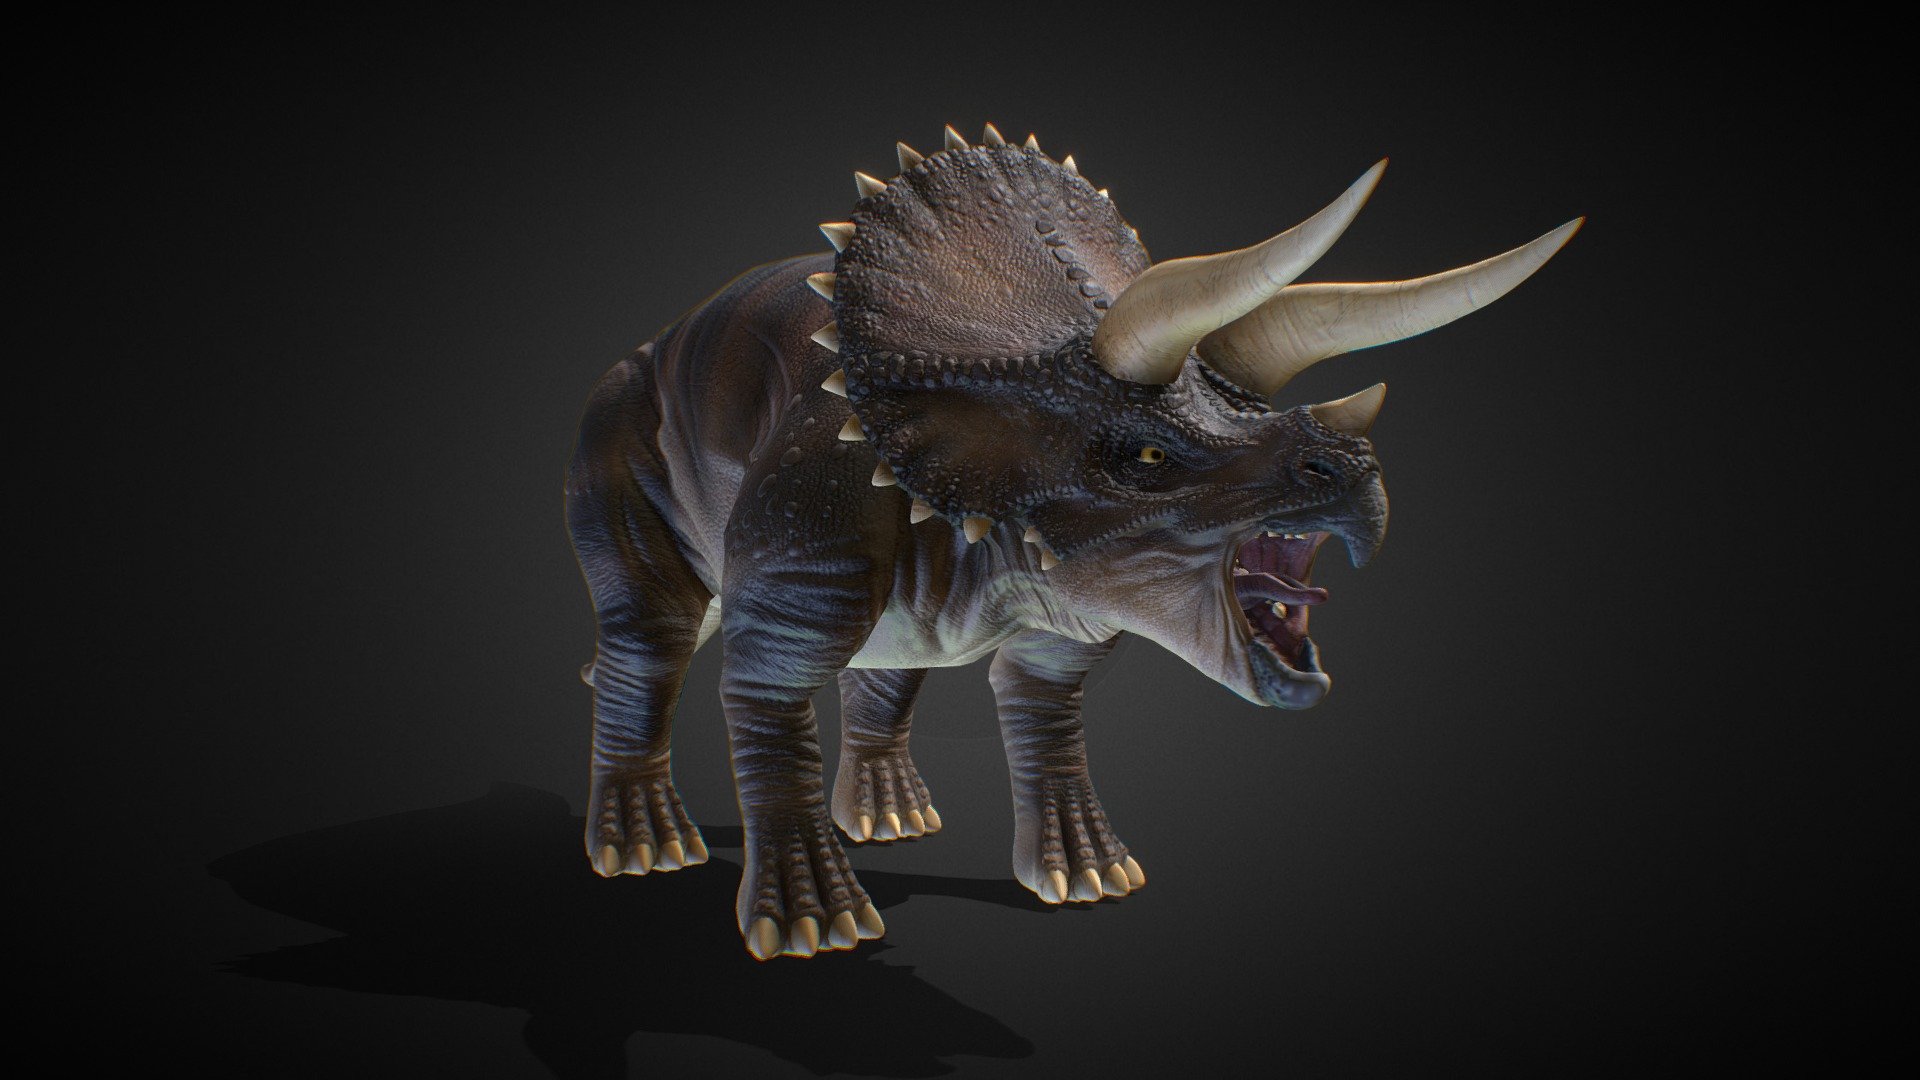 This is my take on a triceratops model I made hope you like it.

If You feel Like. please follow me on my social media&hellip;

Instagram: https://www.instagram.com/sweessedesign/
Behance: https://www.behance.net/sweesse
Youtube: https://www.youtube.com/channel/UCT8PBVBBJsQfbSyG5dwRuEQ - Triceratops - Buy Royalty Free 3D model by Marco Fascinetto (@Marco.Fascinetto) 3d model